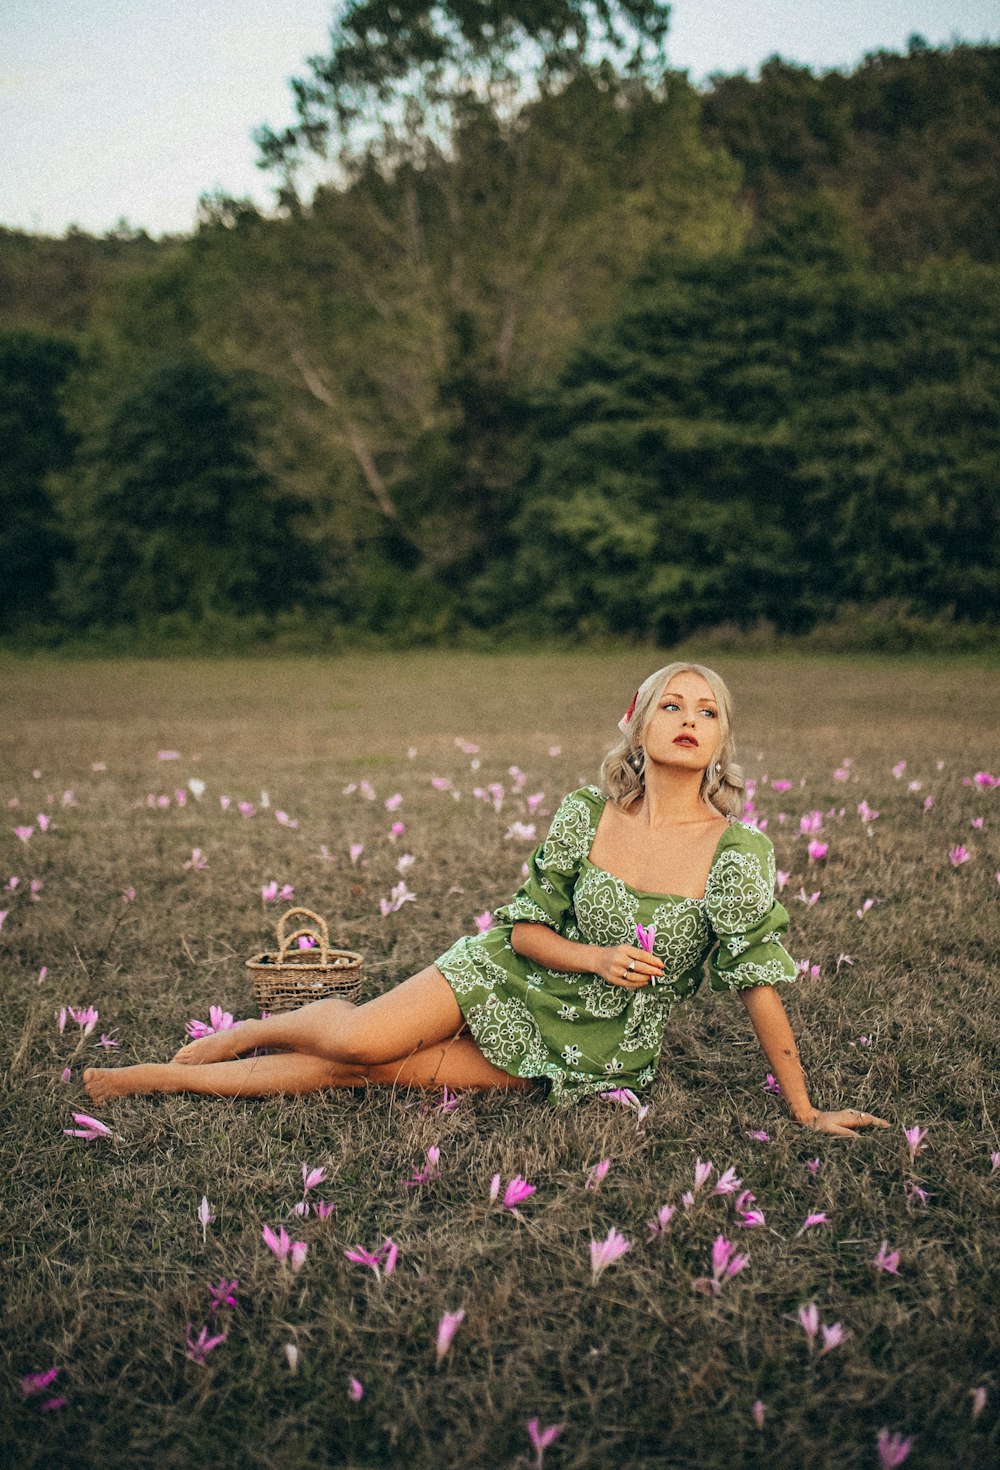 woman in green and white dress sitting on purple flower field during daytime